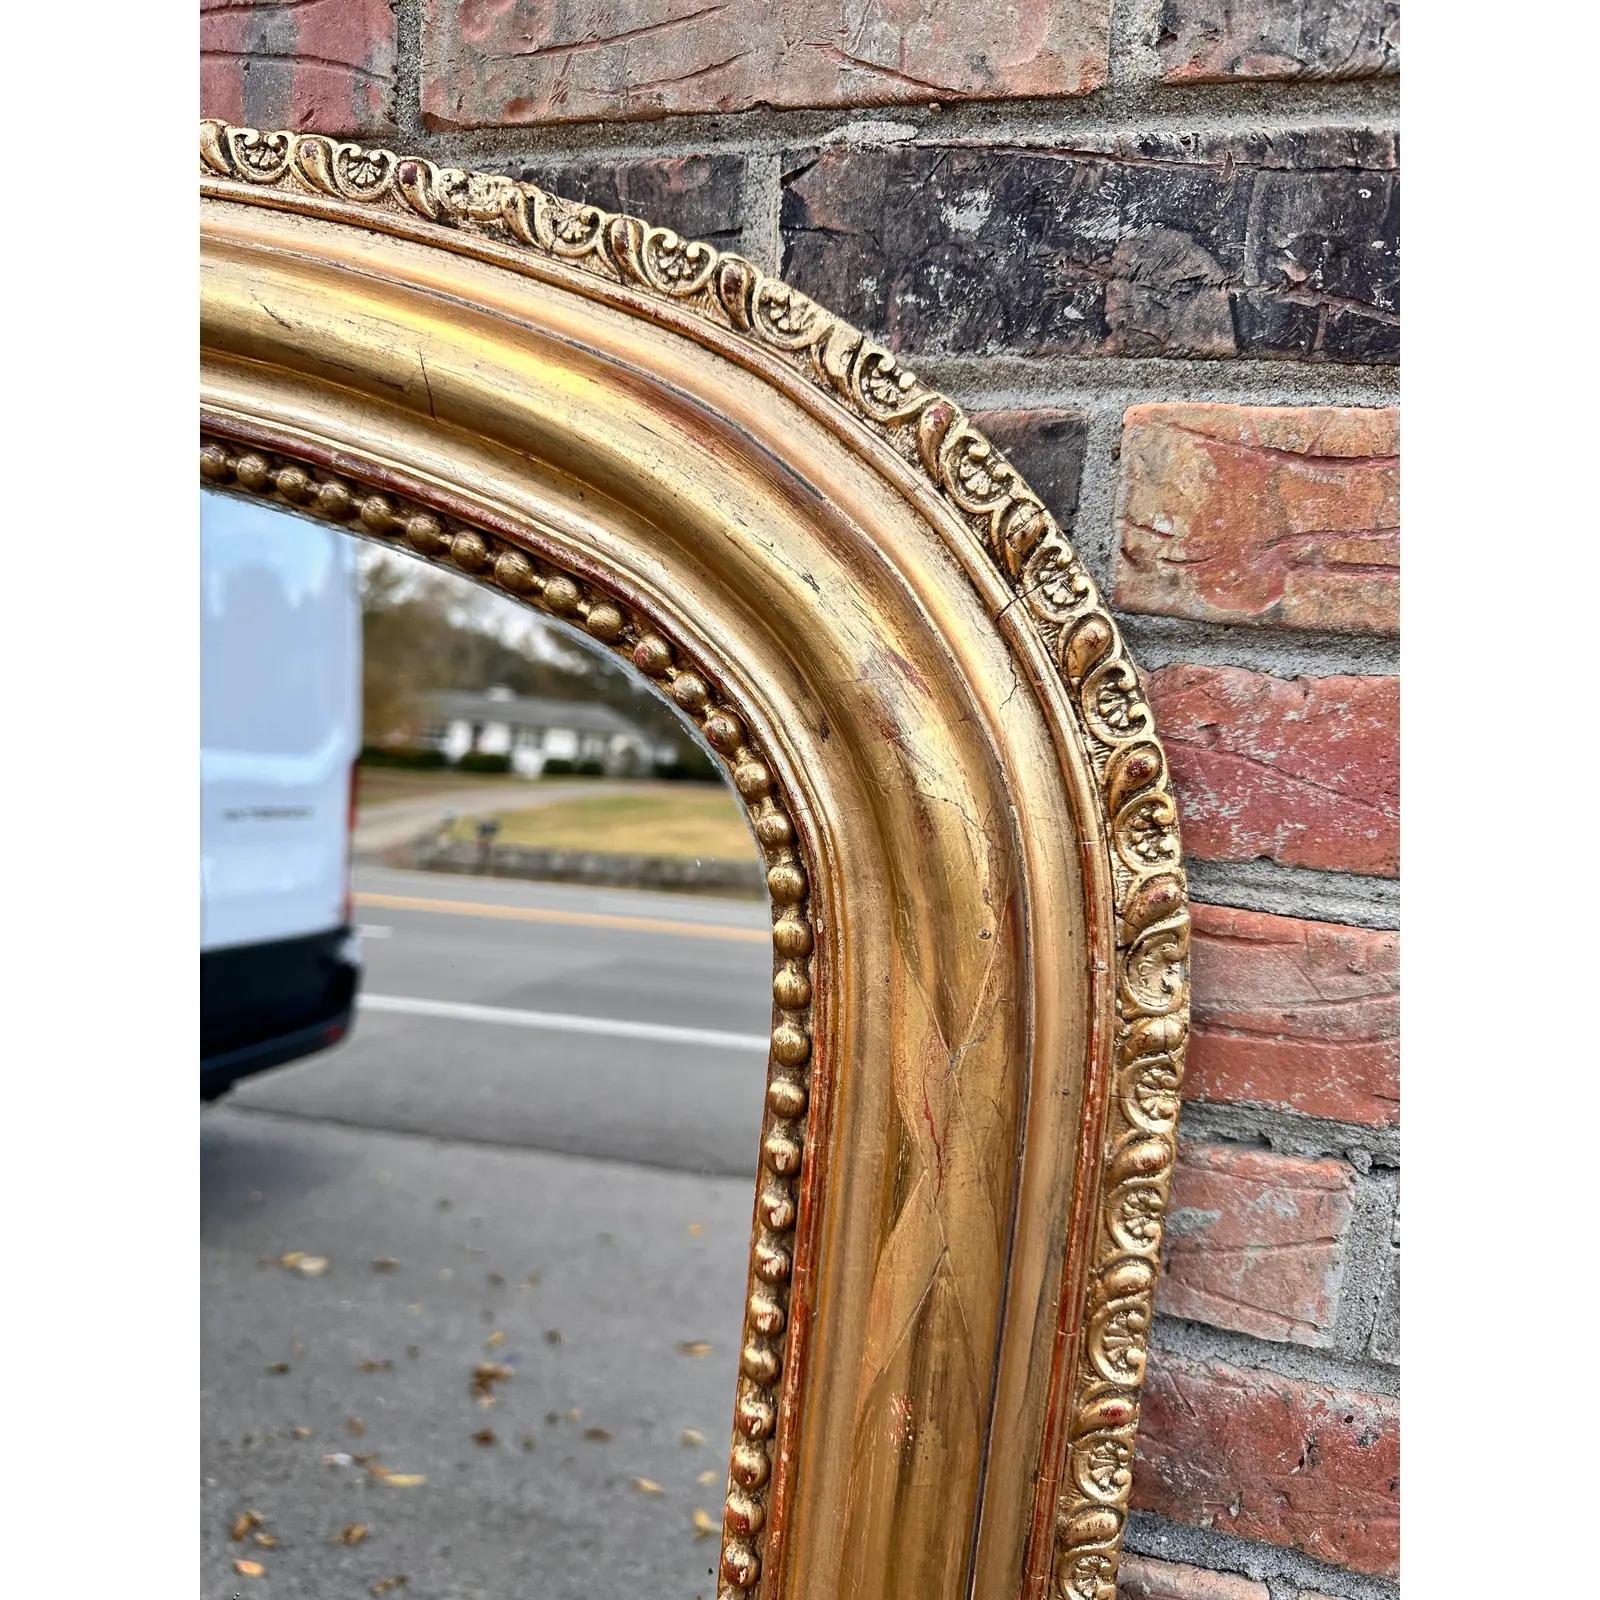 This is a gorgeous antique French mirror! This piece is in excellent condition, with all borders in tact- no missing pieces. The inner border is beaded, while the outer border is a beautiful hand carved floral and paisley pattern, with a light